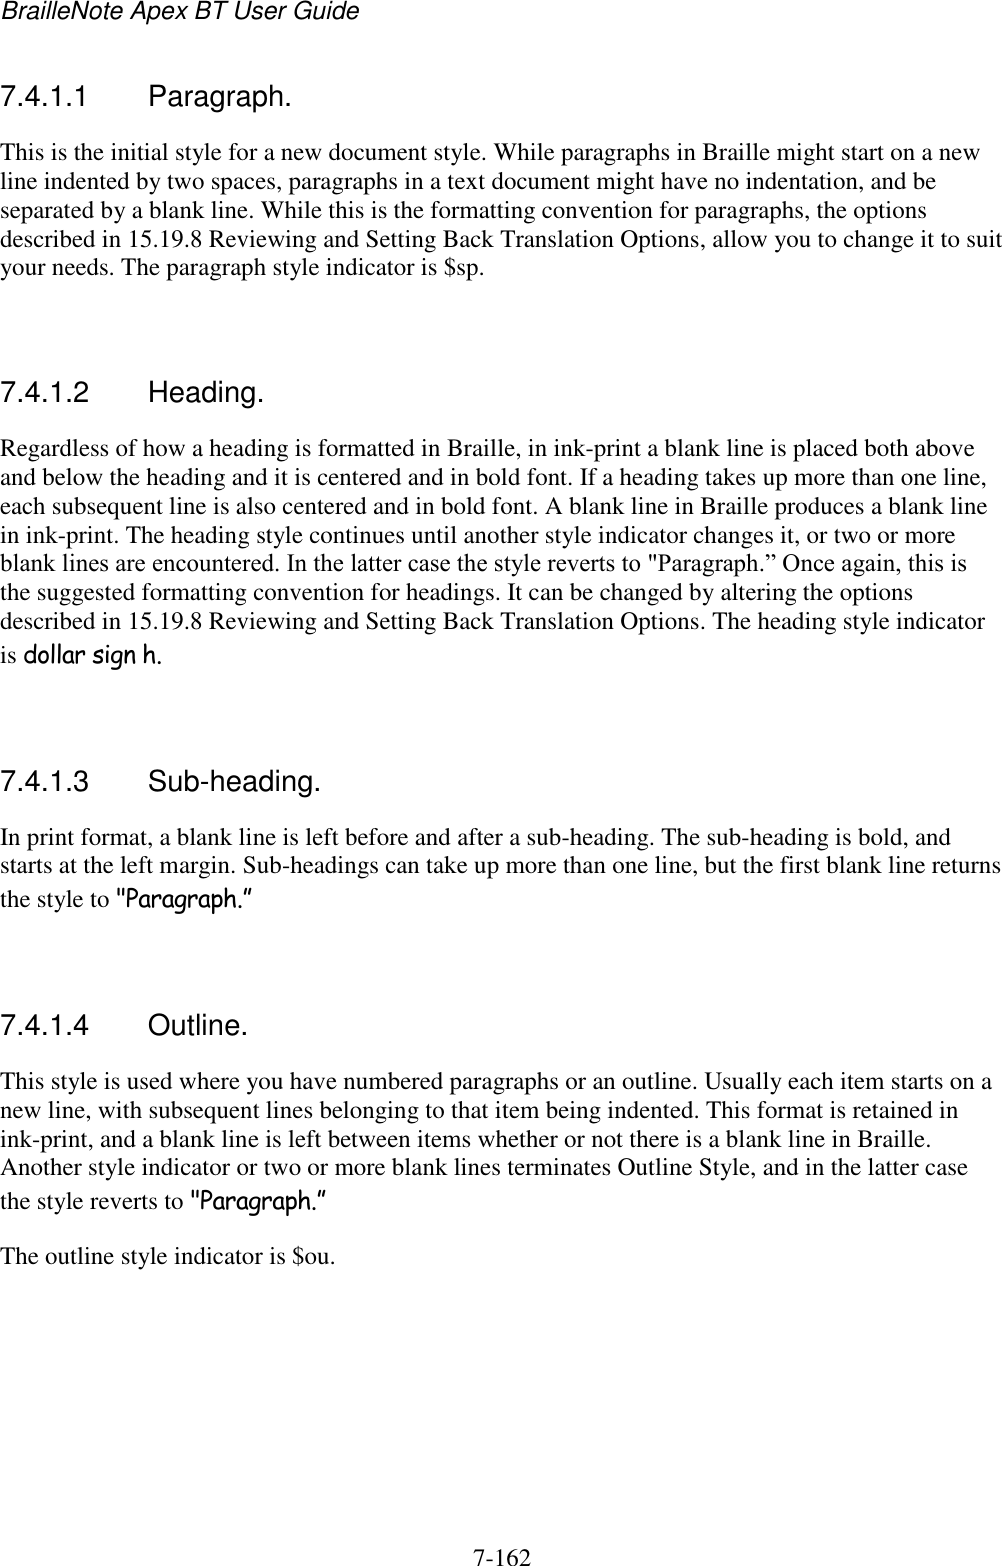 BrailleNote Apex BT User Guide   7-162   7.4.1.1  Paragraph. This is the initial style for a new document style. While paragraphs in Braille might start on a new line indented by two spaces, paragraphs in a text document might have no indentation, and be separated by a blank line. While this is the formatting convention for paragraphs, the options described in 15.19.8 Reviewing and Setting Back Translation Options, allow you to change it to suit your needs. The paragraph style indicator is $sp.   7.4.1.2  Heading. Regardless of how a heading is formatted in Braille, in ink-print a blank line is placed both above and below the heading and it is centered and in bold font. If a heading takes up more than one line, each subsequent line is also centered and in bold font. A blank line in Braille produces a blank line in ink-print. The heading style continues until another style indicator changes it, or two or more blank lines are encountered. In the latter case the style reverts to &quot;Paragraph.” Once again, this is the suggested formatting convention for headings. It can be changed by altering the options described in 15.19.8 Reviewing and Setting Back Translation Options. The heading style indicator is dollar sign h.   7.4.1.3  Sub-heading. In print format, a blank line is left before and after a sub-heading. The sub-heading is bold, and starts at the left margin. Sub-headings can take up more than one line, but the first blank line returns the style to &quot;Paragraph.”    7.4.1.4  Outline. This style is used where you have numbered paragraphs or an outline. Usually each item starts on a new line, with subsequent lines belonging to that item being indented. This format is retained in ink-print, and a blank line is left between items whether or not there is a blank line in Braille. Another style indicator or two or more blank lines terminates Outline Style, and in the latter case the style reverts to &quot;Paragraph.” The outline style indicator is $ou.  